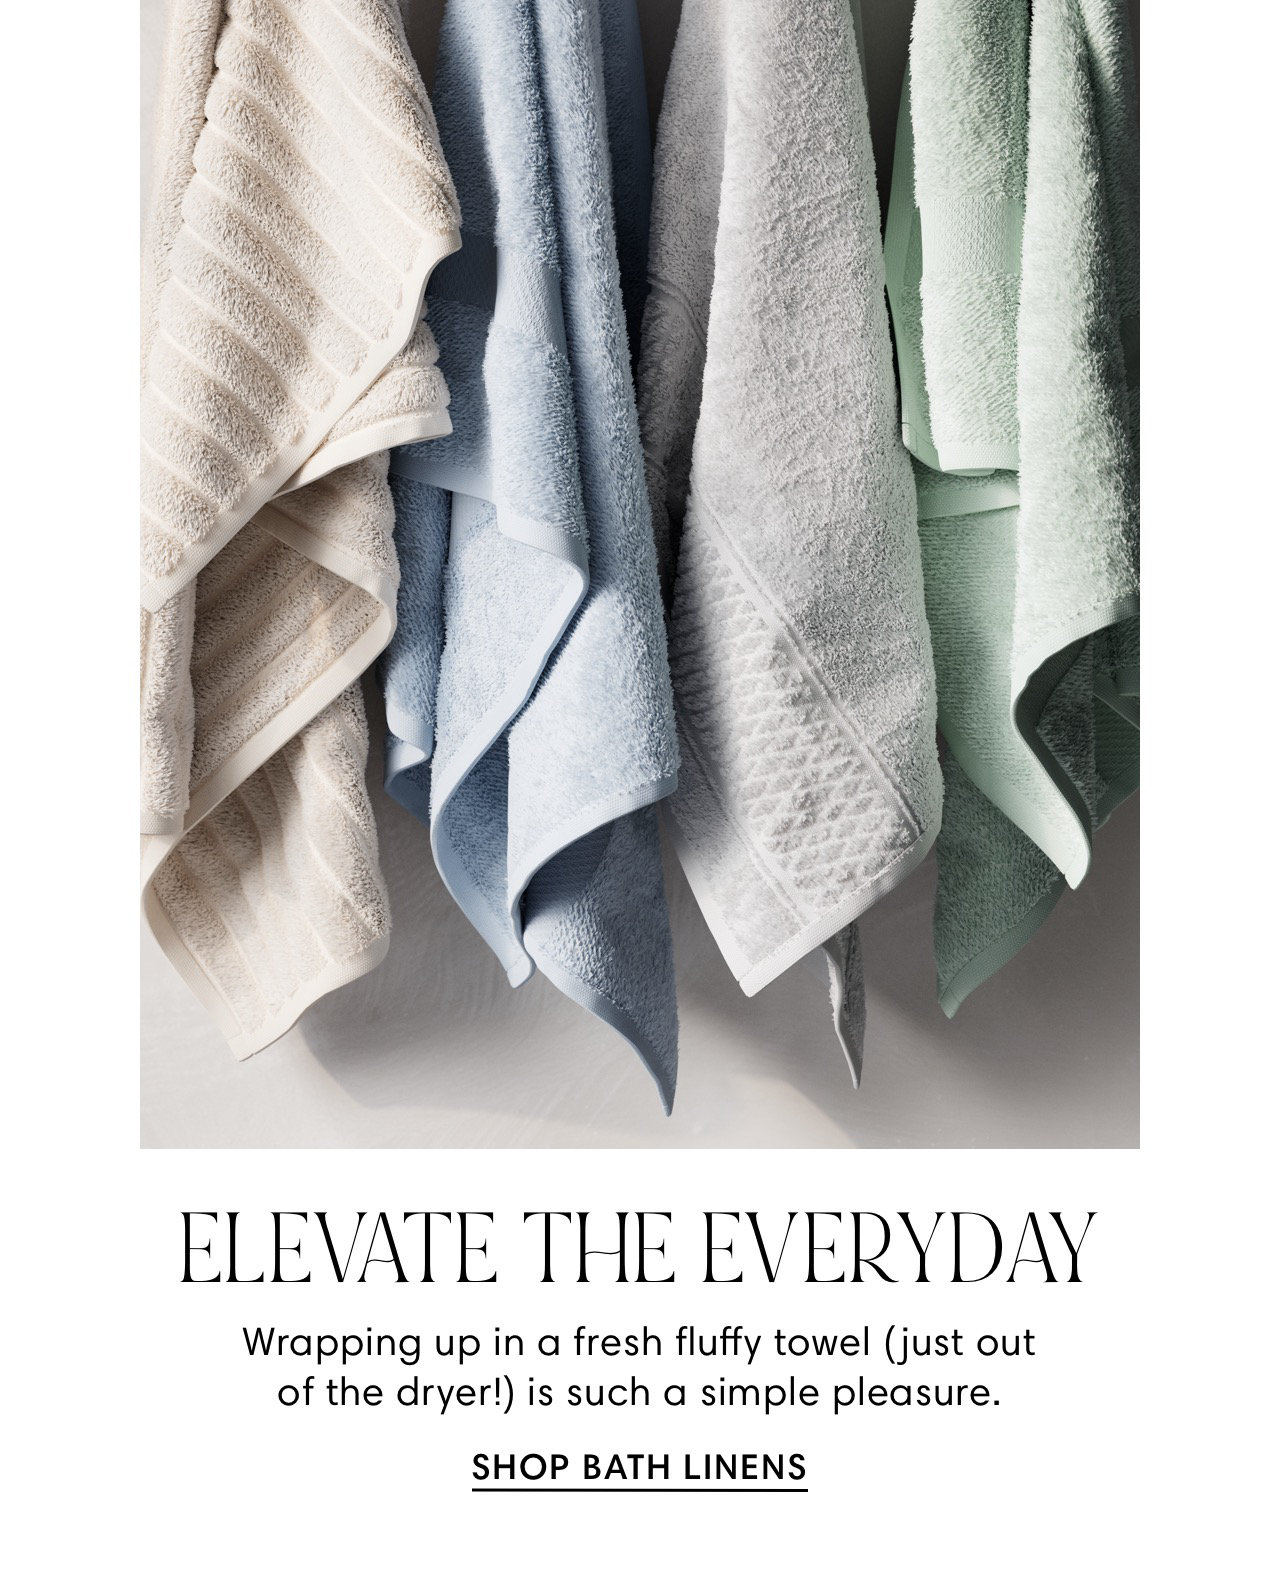  ELEVATE THE EVERYDAY Wrapping up in a fresh fluffy towel just out of the dryer! is such a simple pleasure. SHOP BATH LINENS 